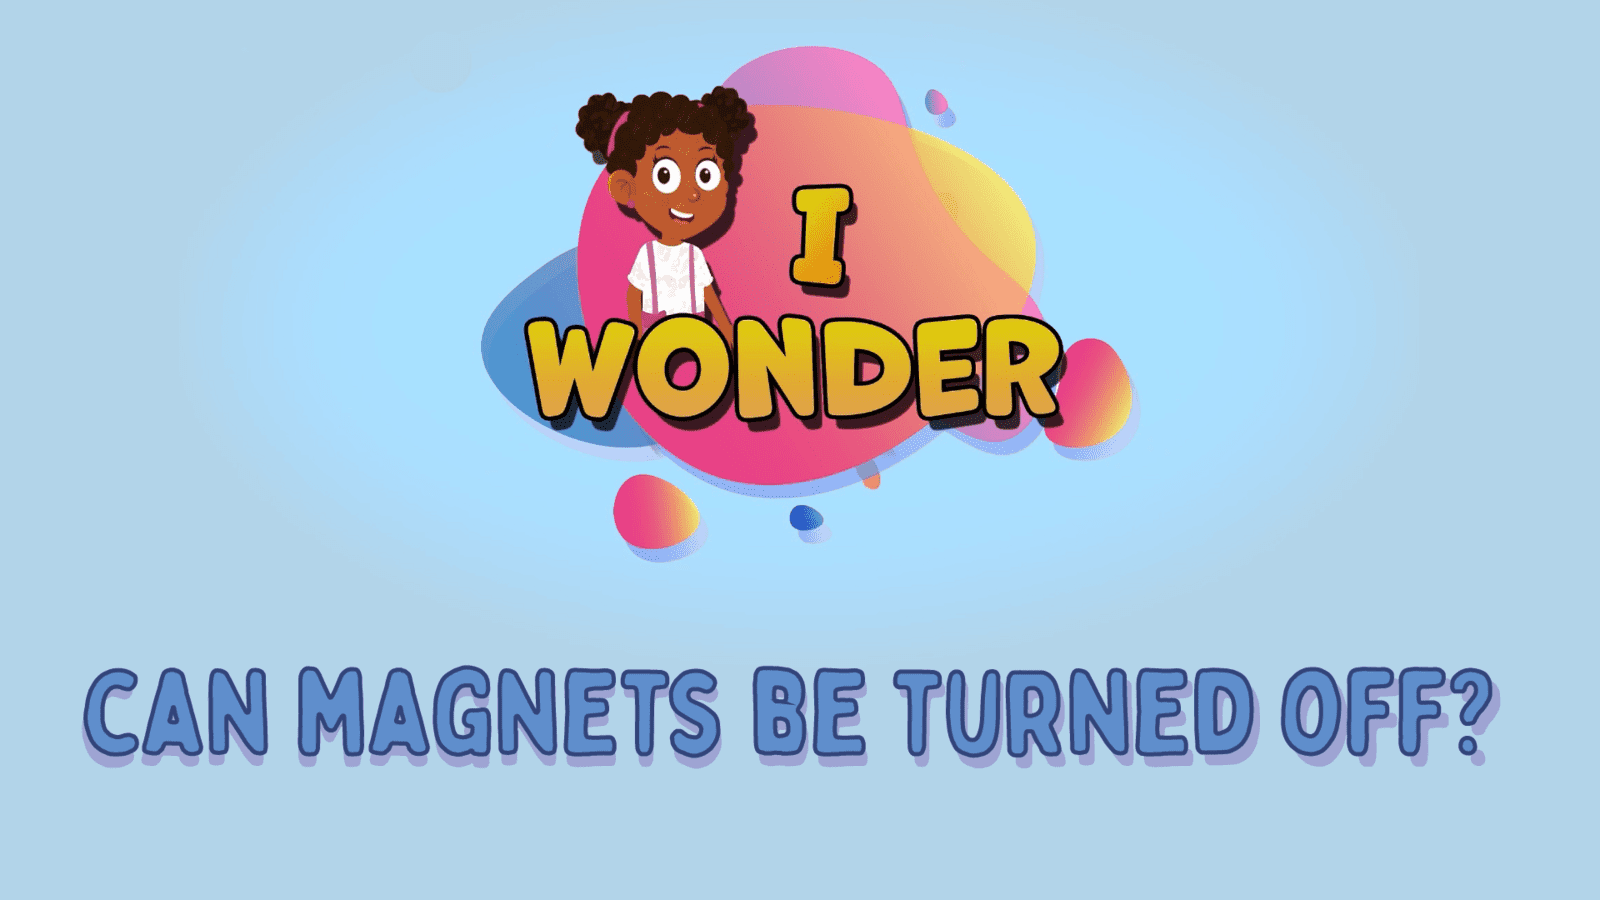 Can Magnets Be Turned Off?